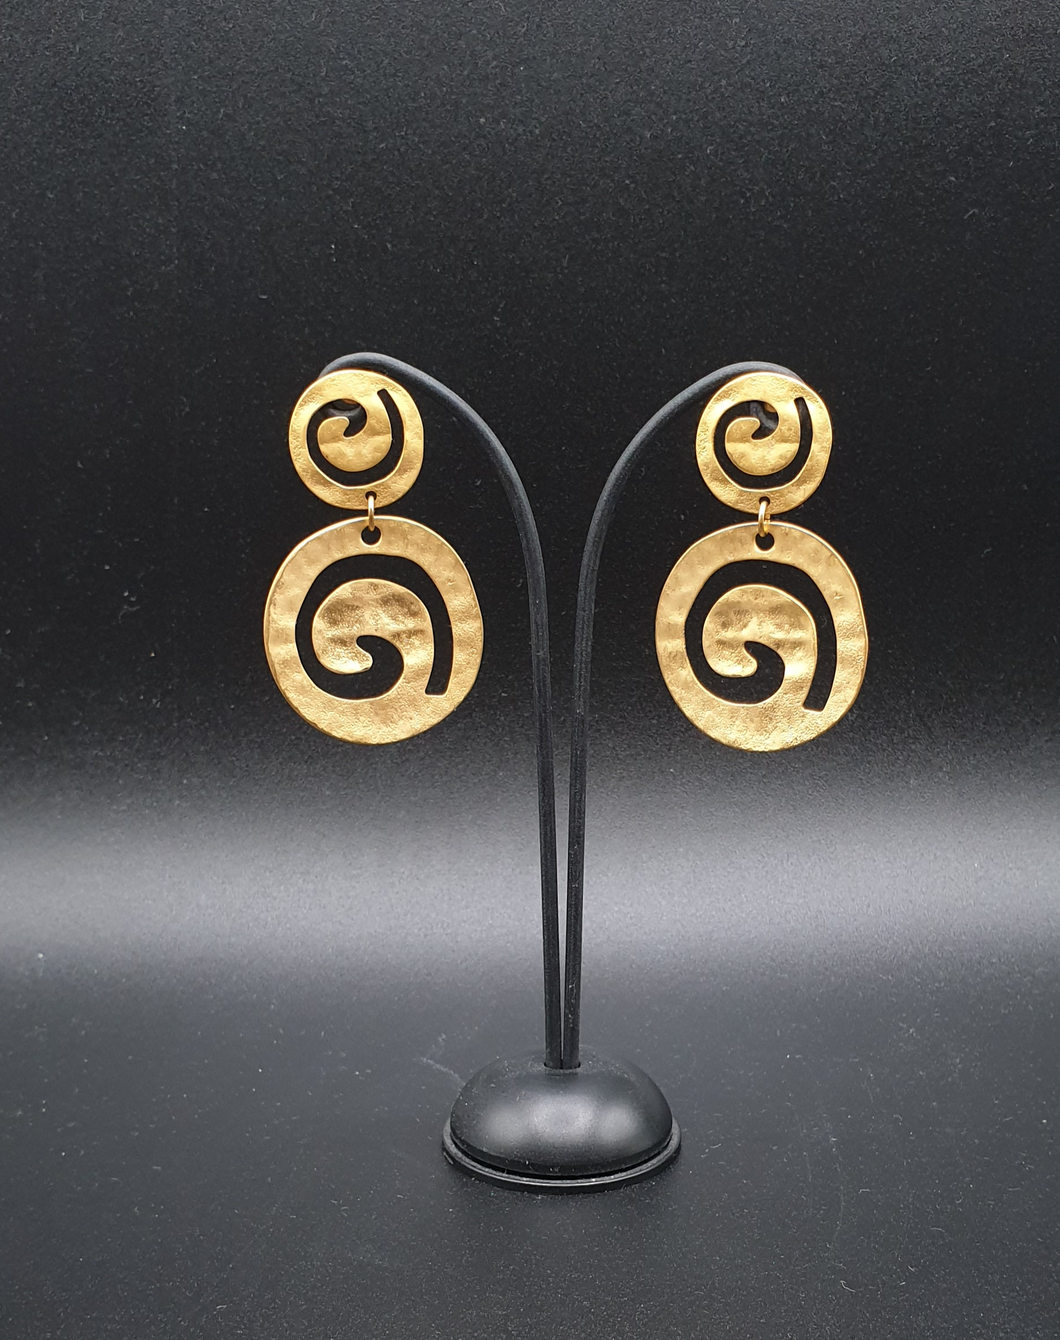 golden metal stud earrings with two decorative circles